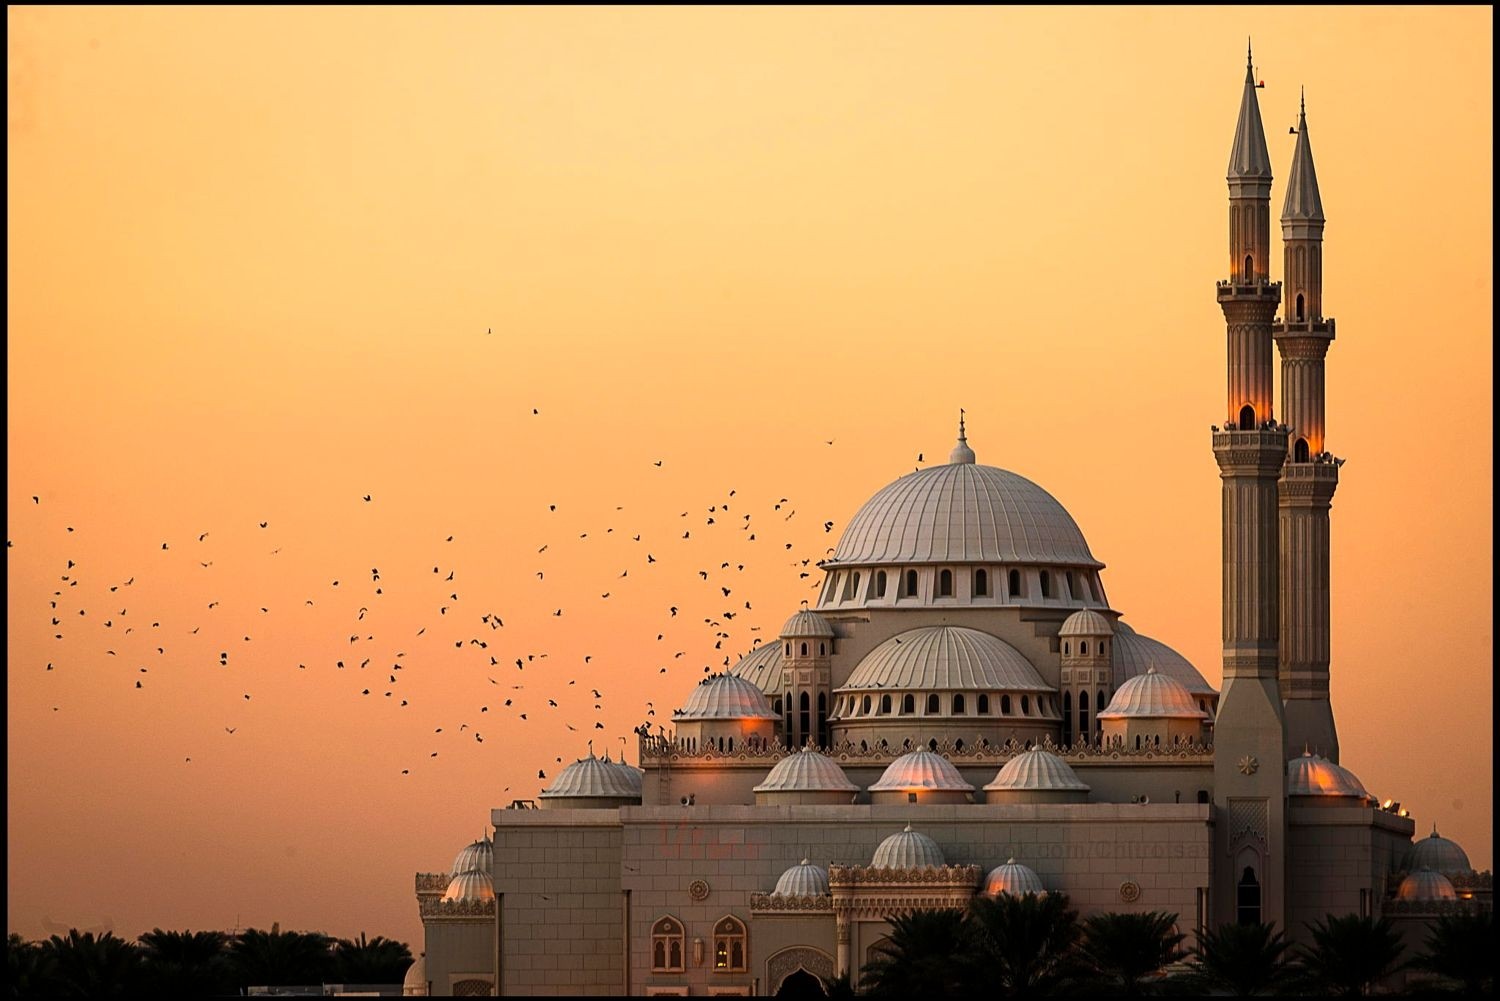 General 1500x1001 photography nature landscape mosque architecture Islam flying birds sunset lights religion India